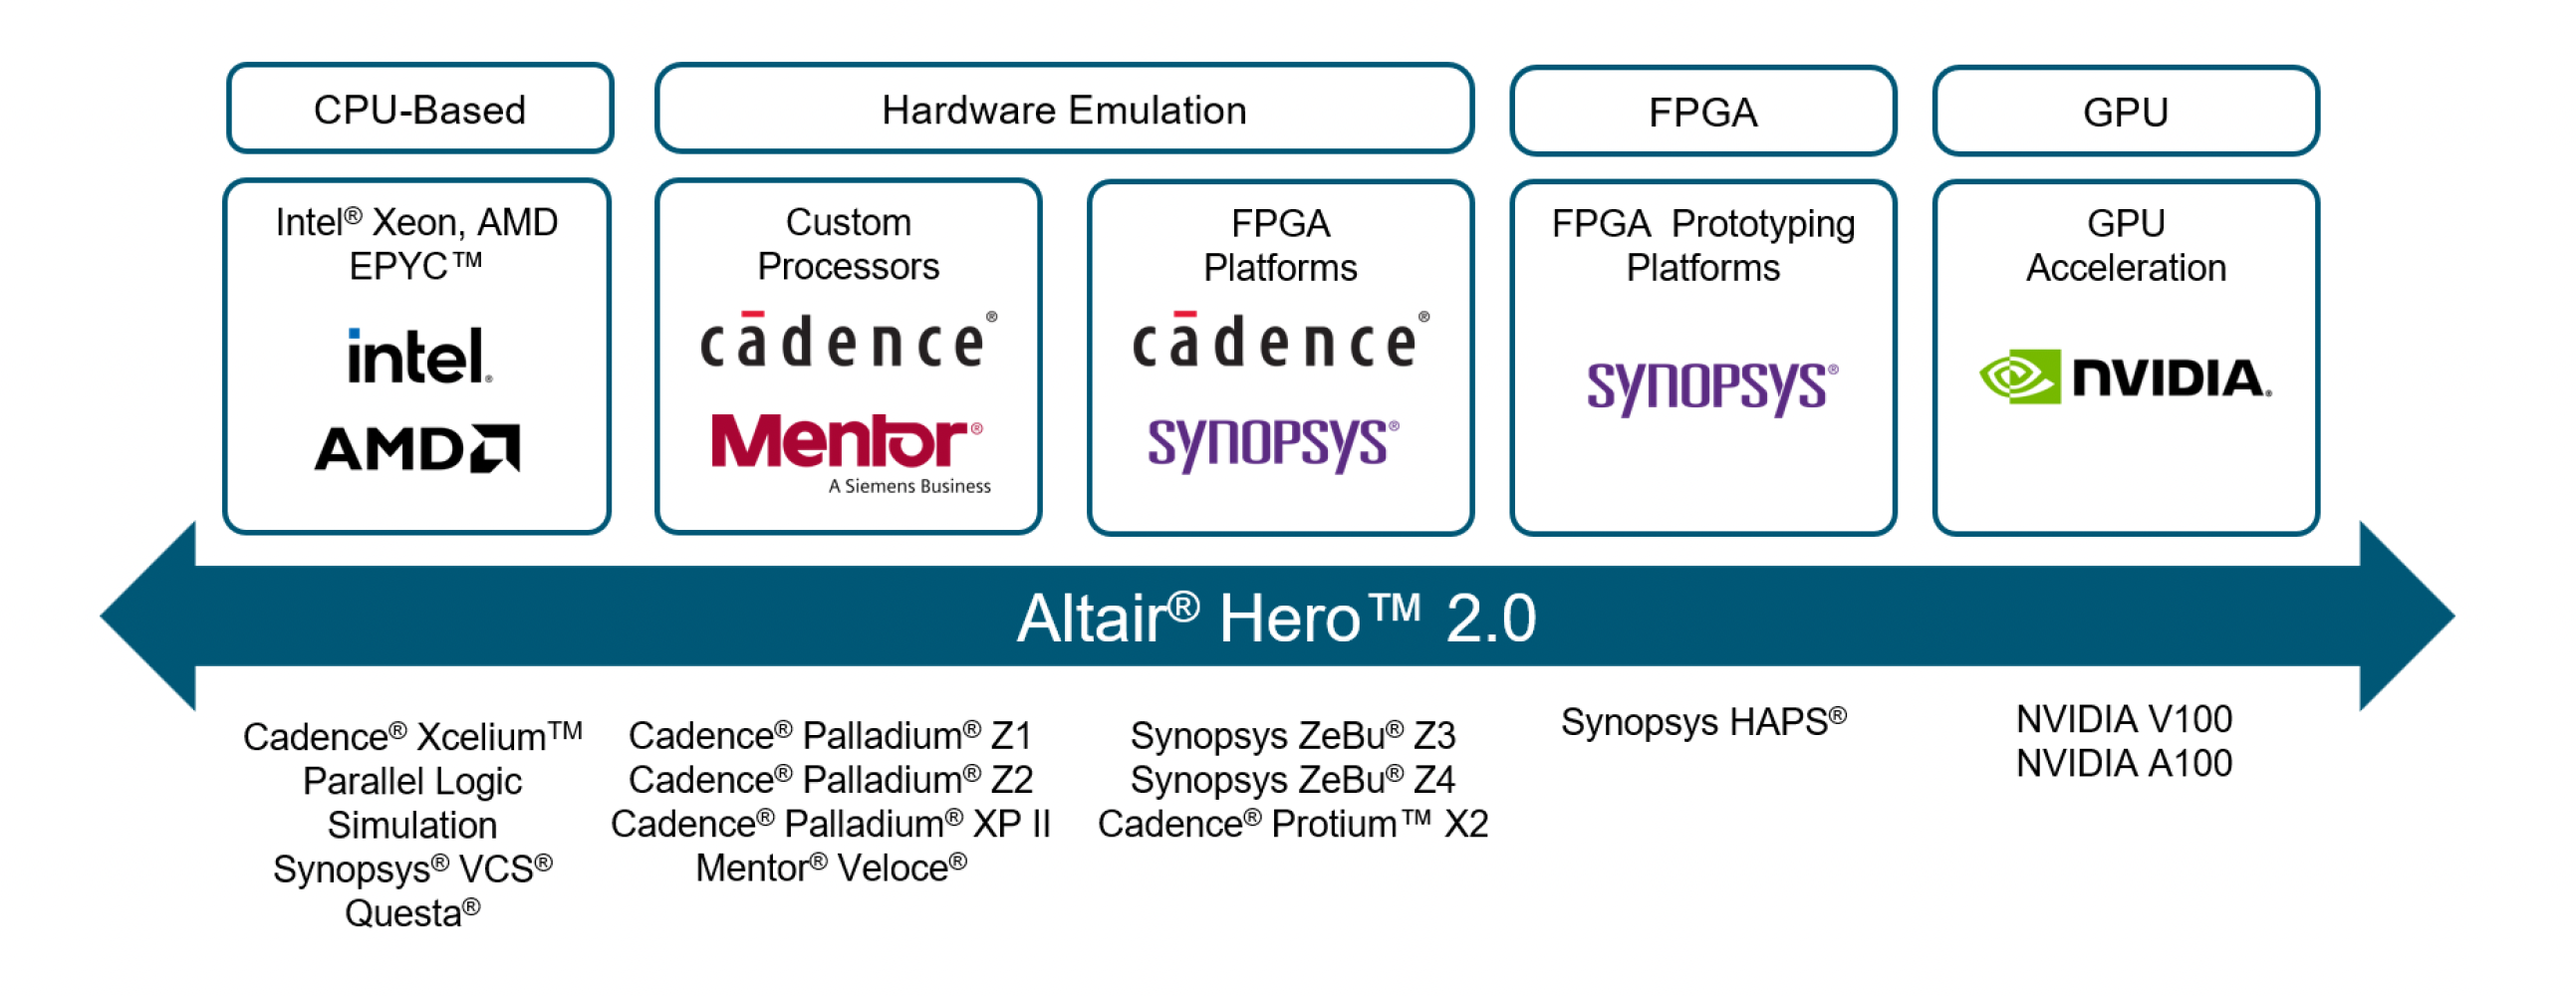 Supports Multiple Verification and Emulation Technologies